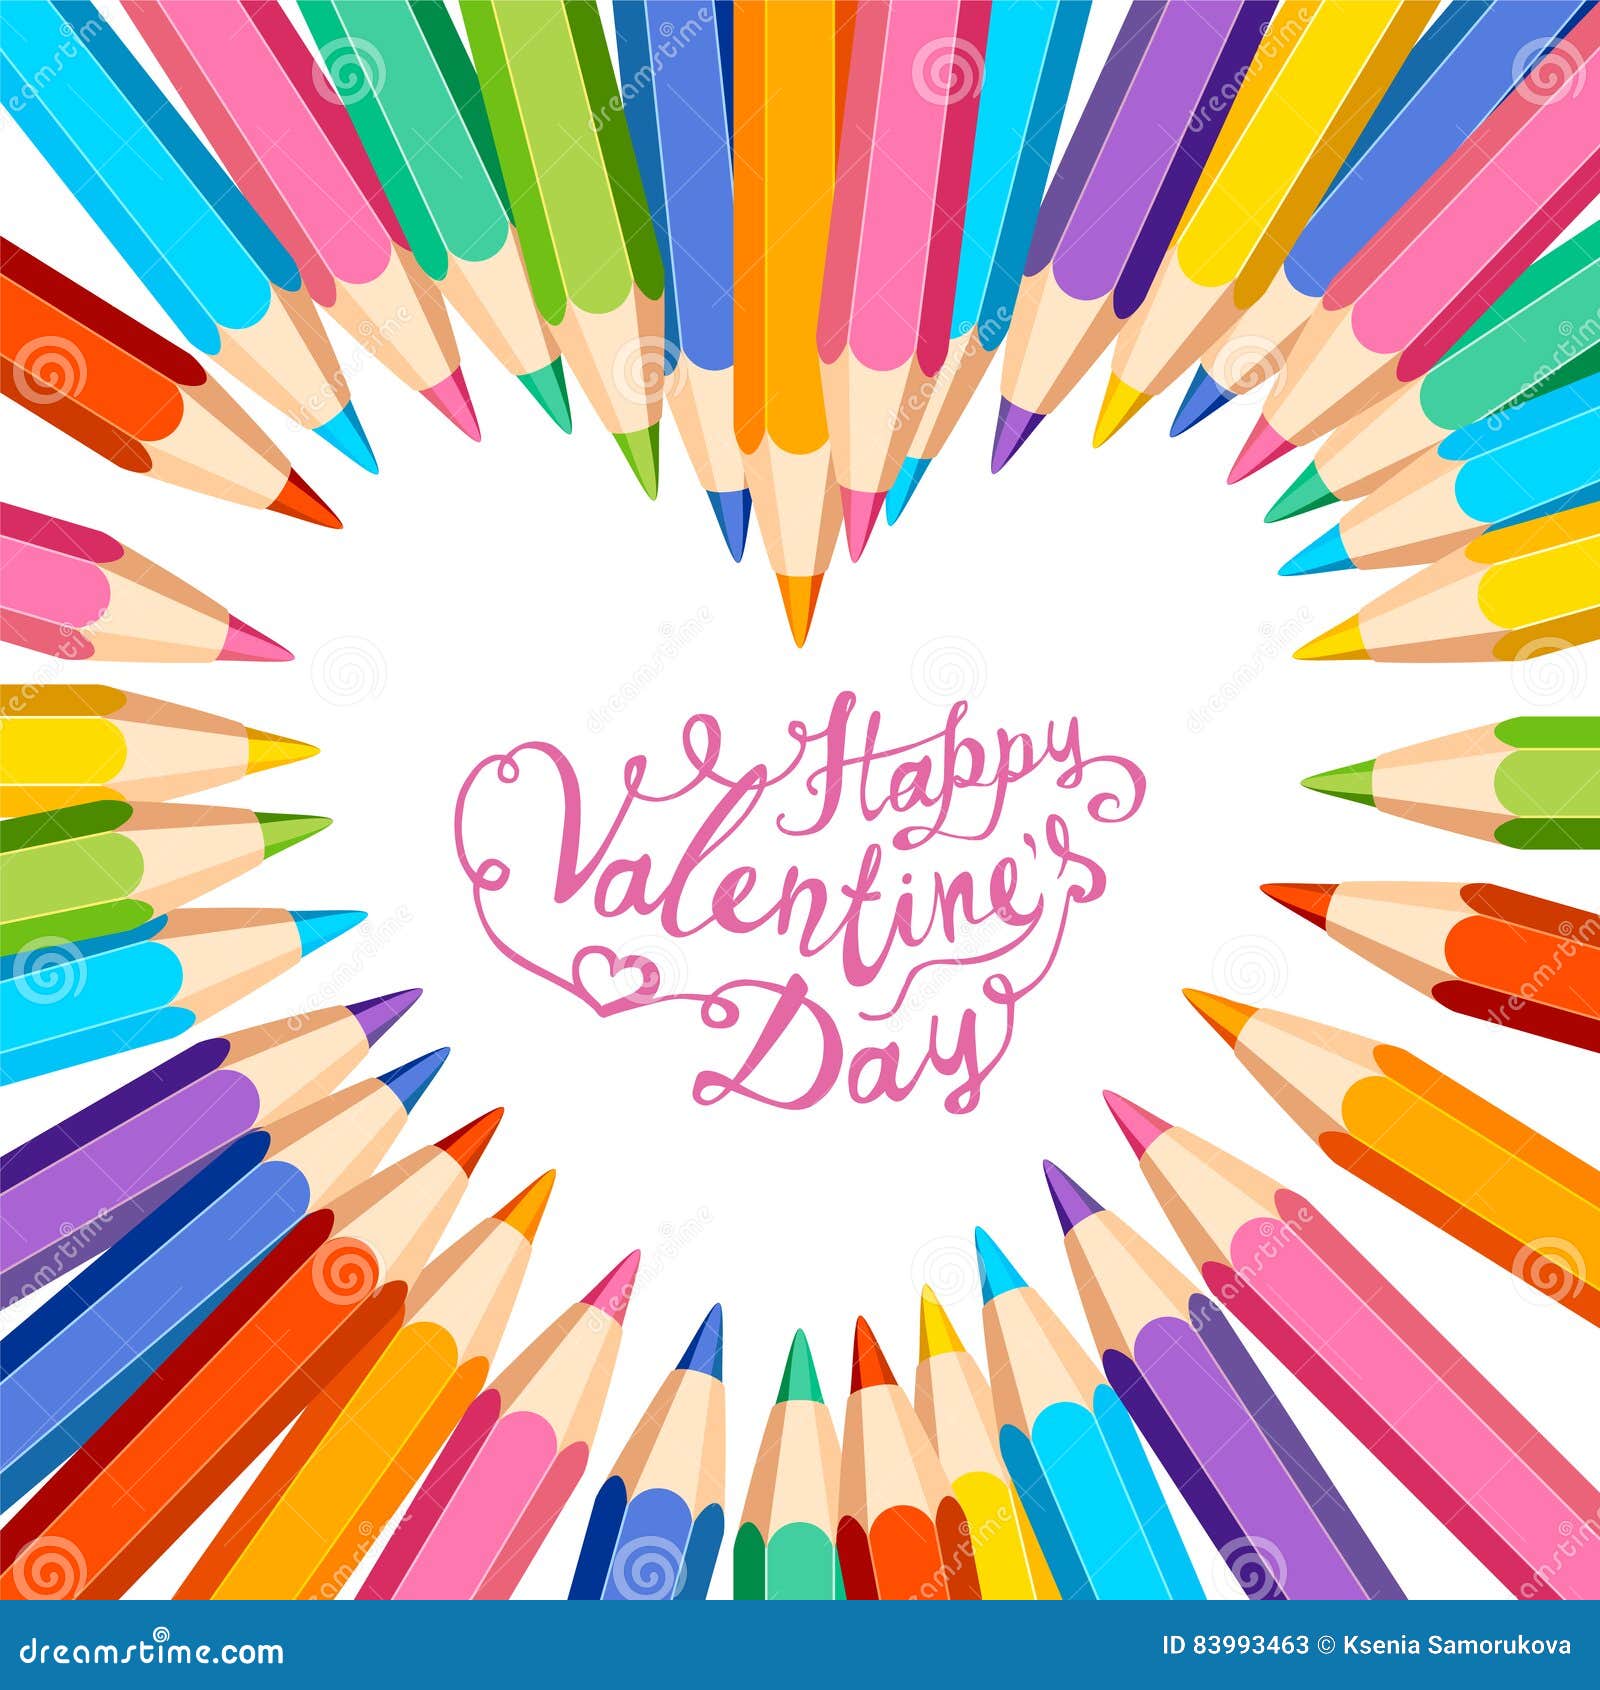 Happy Valentines Day Card. Heart Frame of Colored Pencils Stock